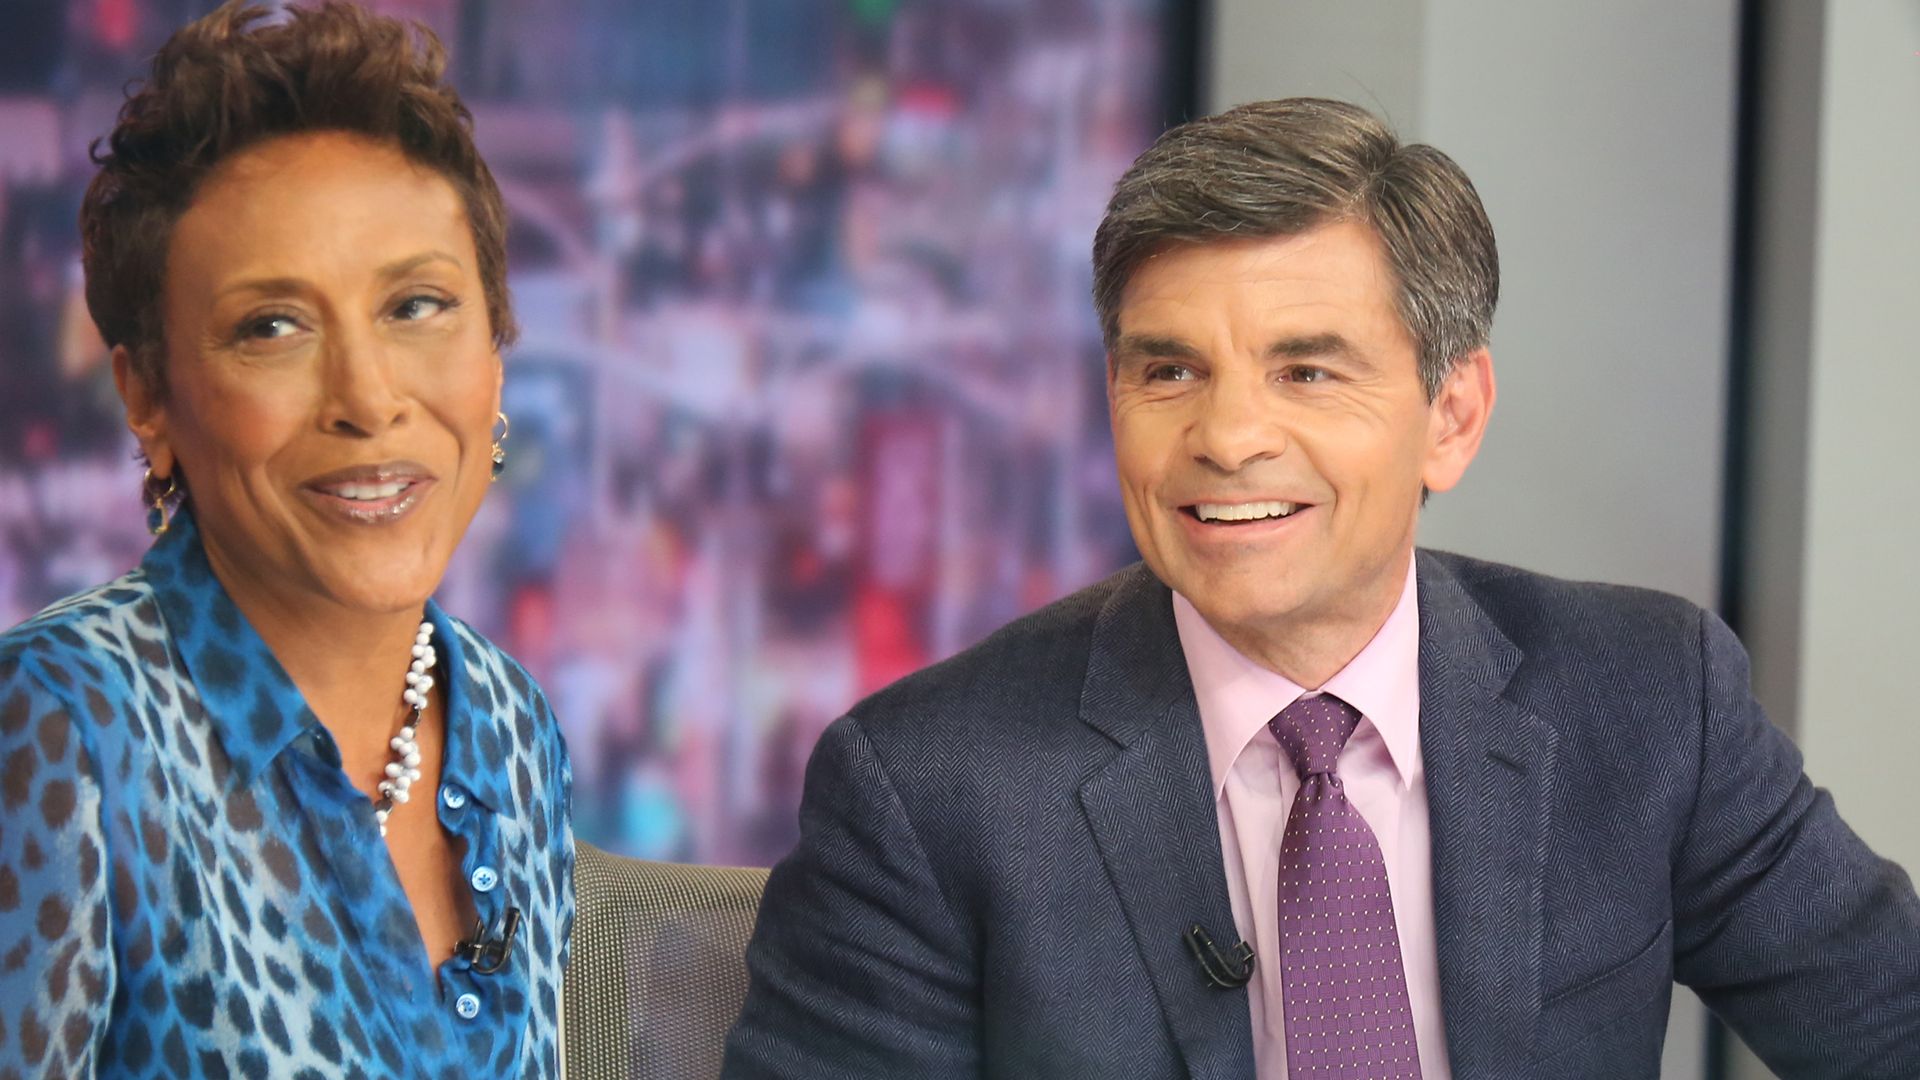 George Stephanopoulos and Robin Roberts